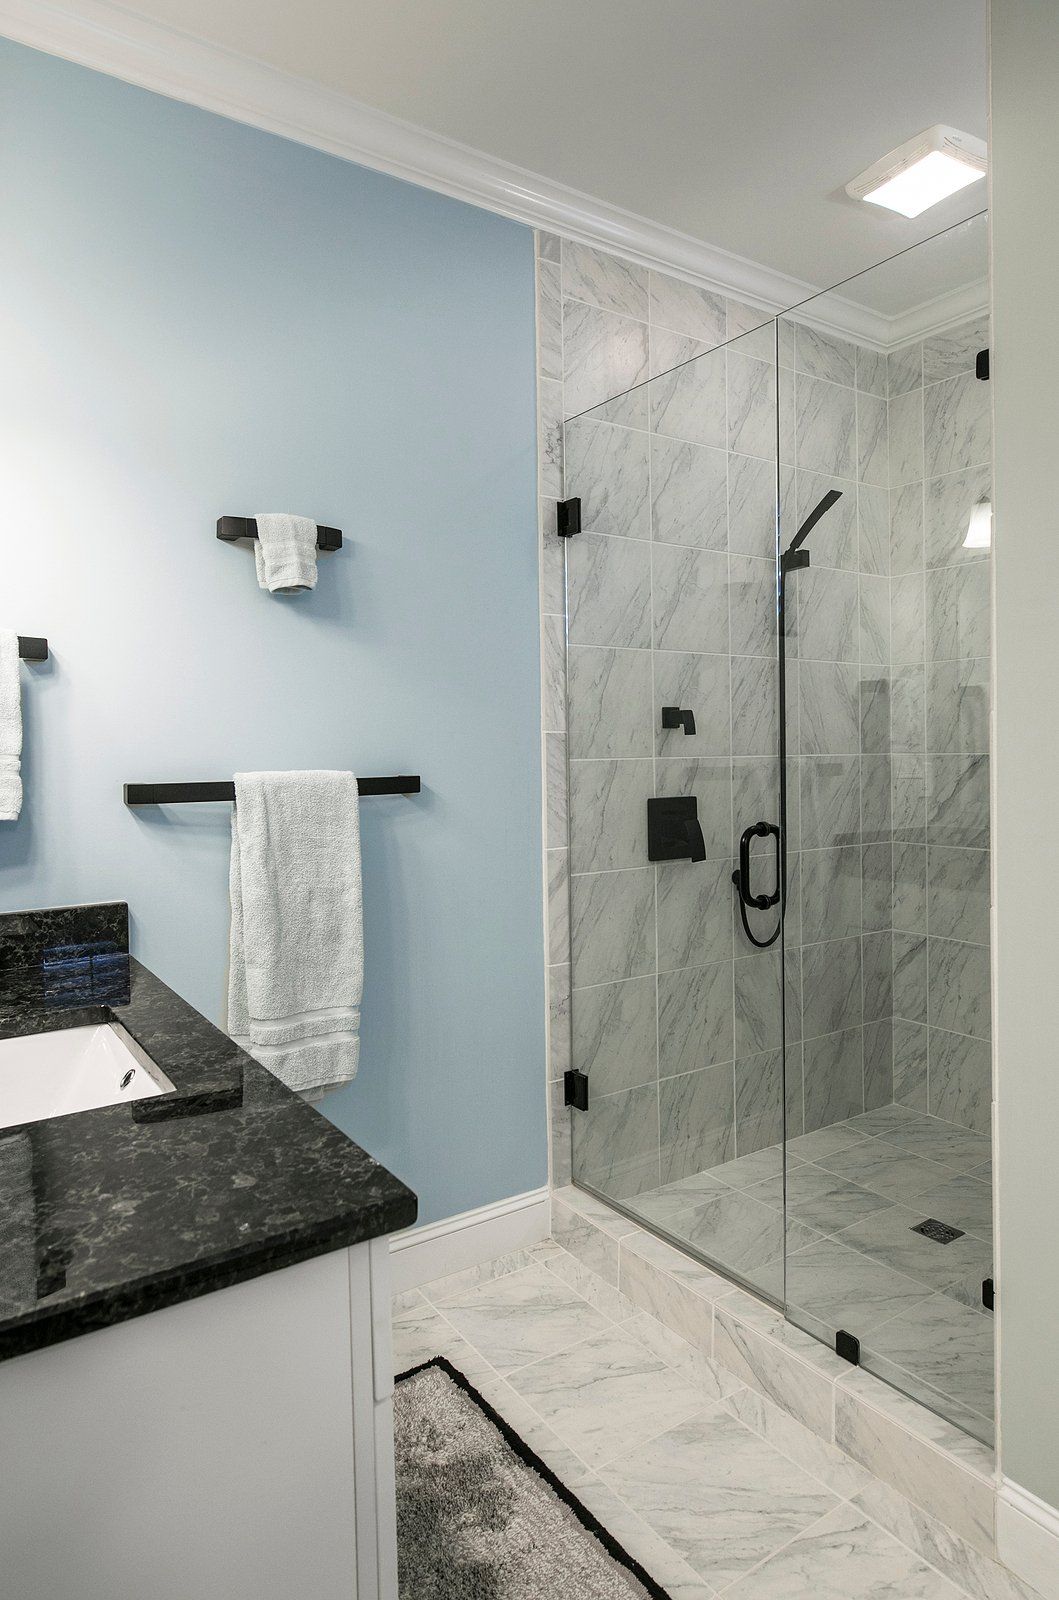 Bathroom Remodeling Services Near You